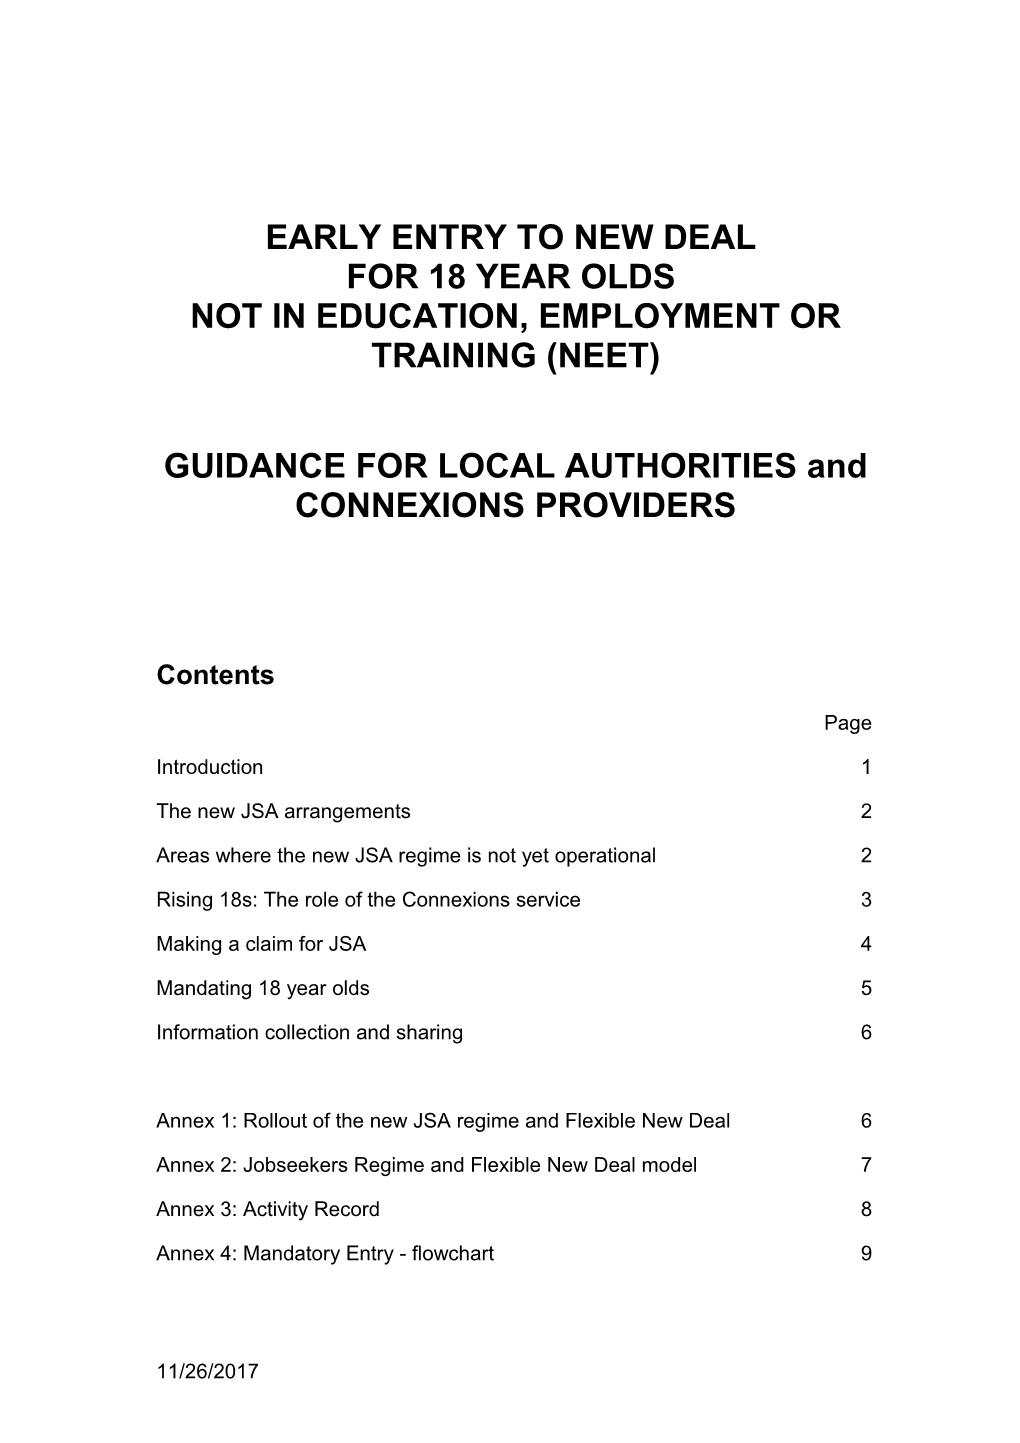 Guidance For Local Authorities And Jobcentre Plus Advisers On Mandating 18 Year Olds Who Have Been Neet For 26 Weeks To The Flexible New Deal